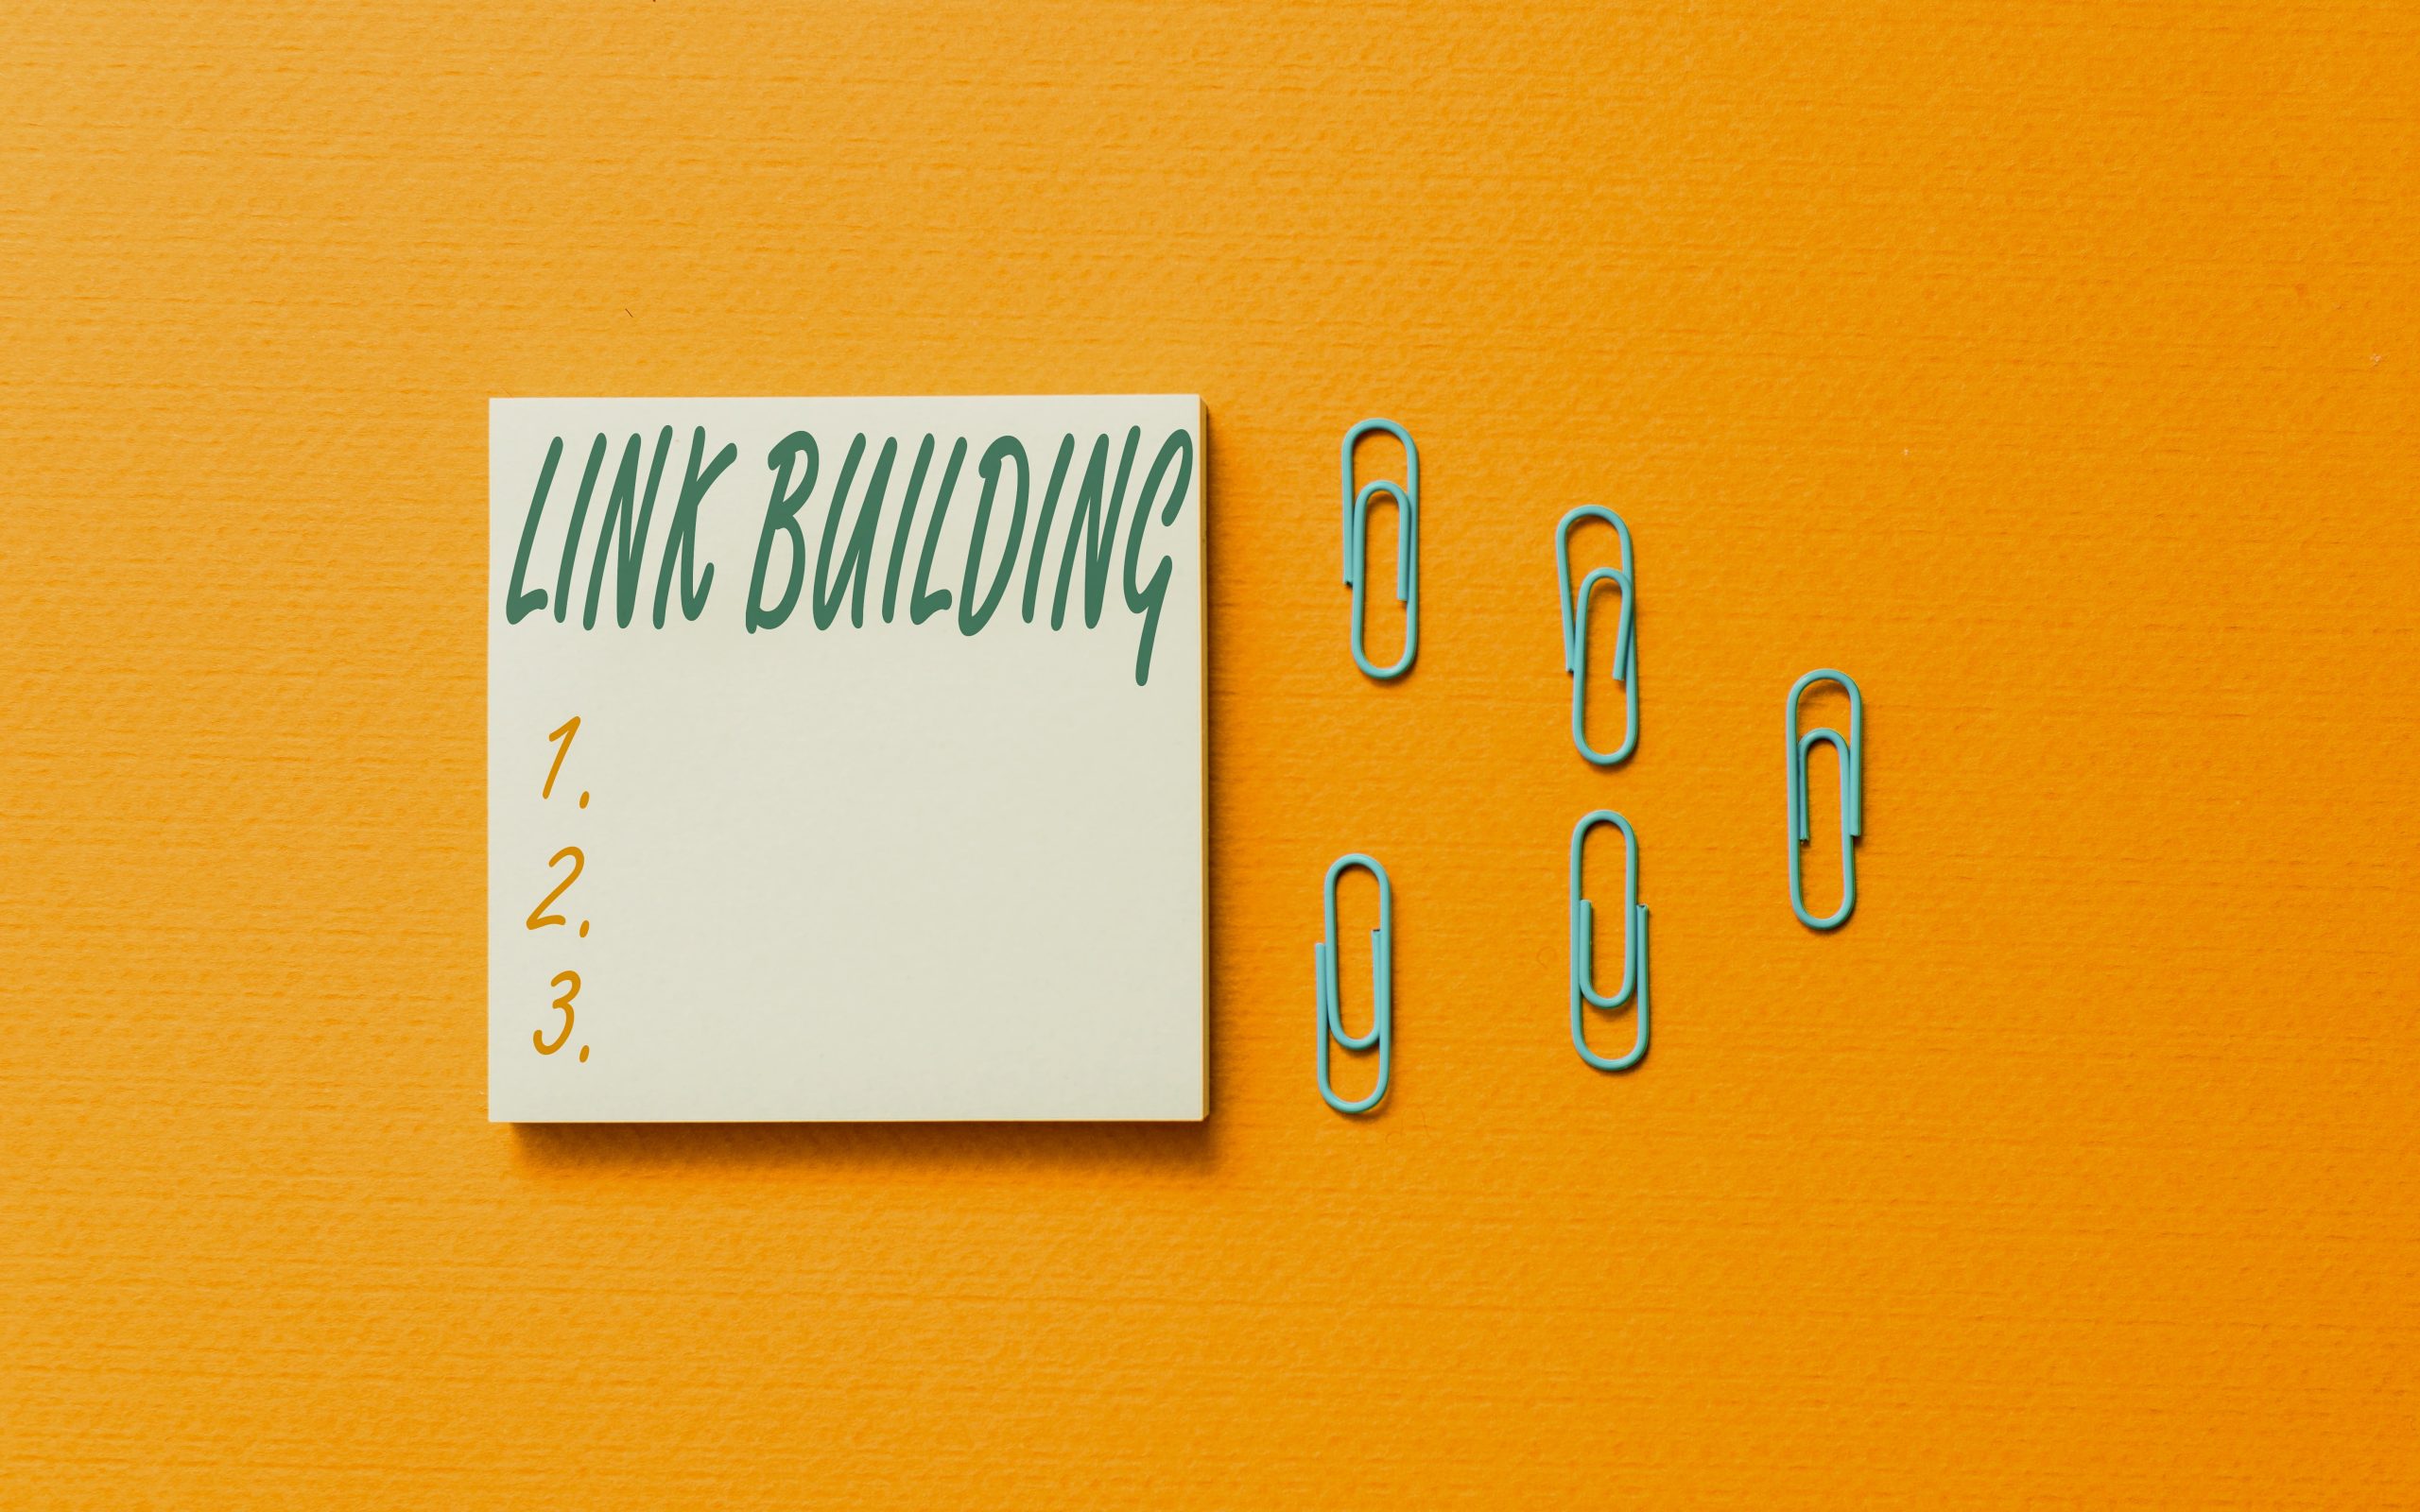 Link Building 101 (Link Building for Beginners Guide)